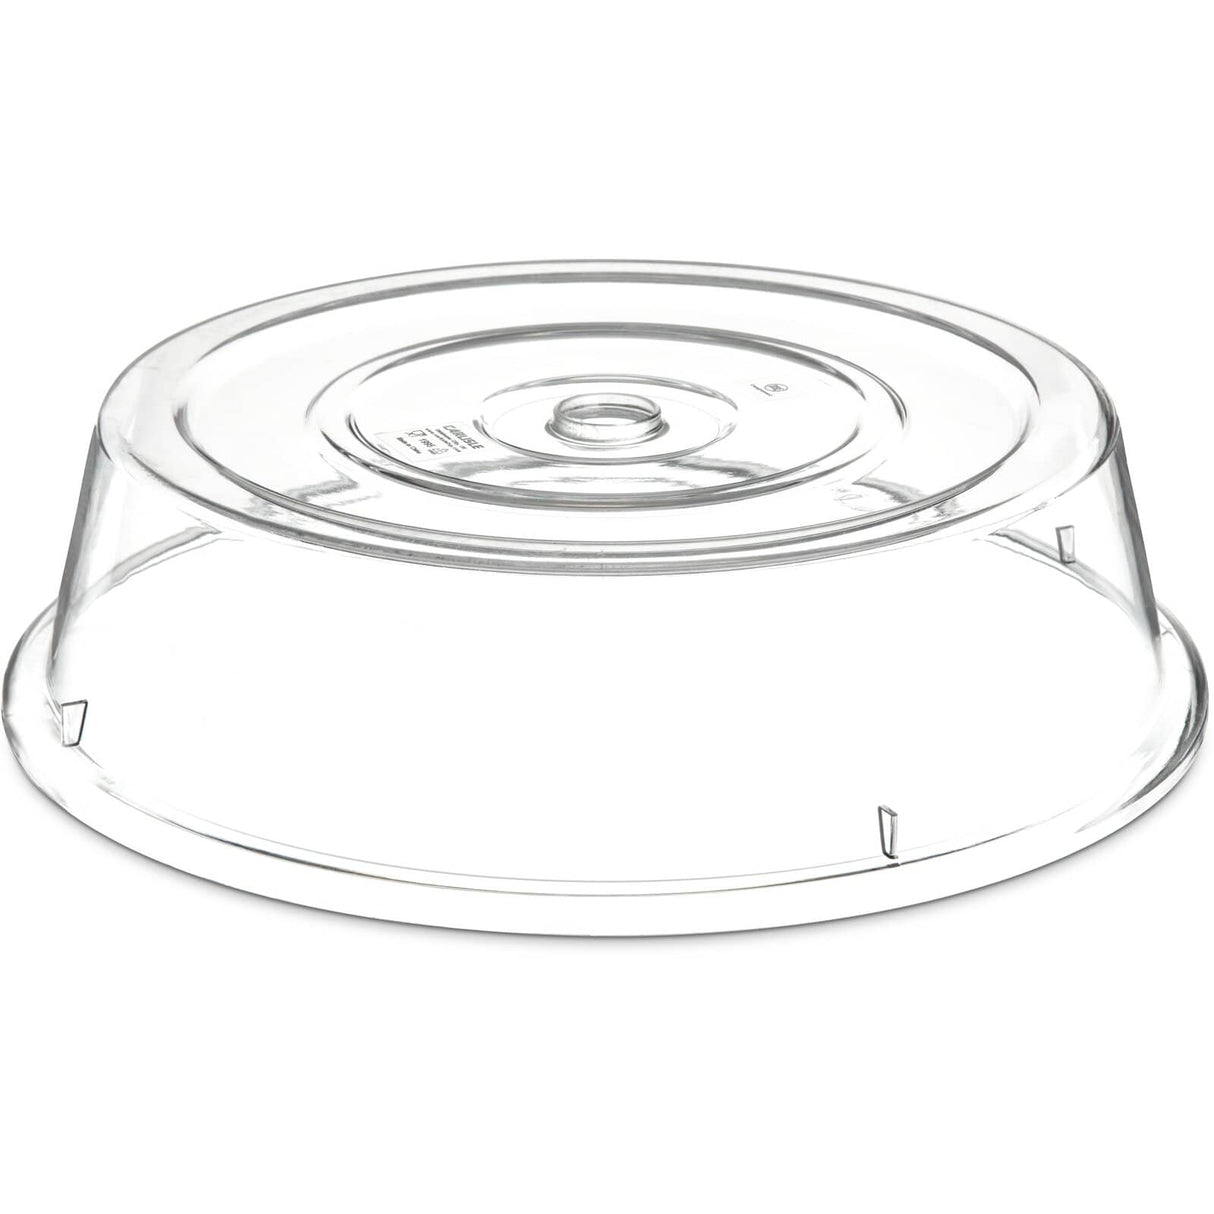 CARLISLE 199407 COVER PLATE 12IN  PC CLEAR